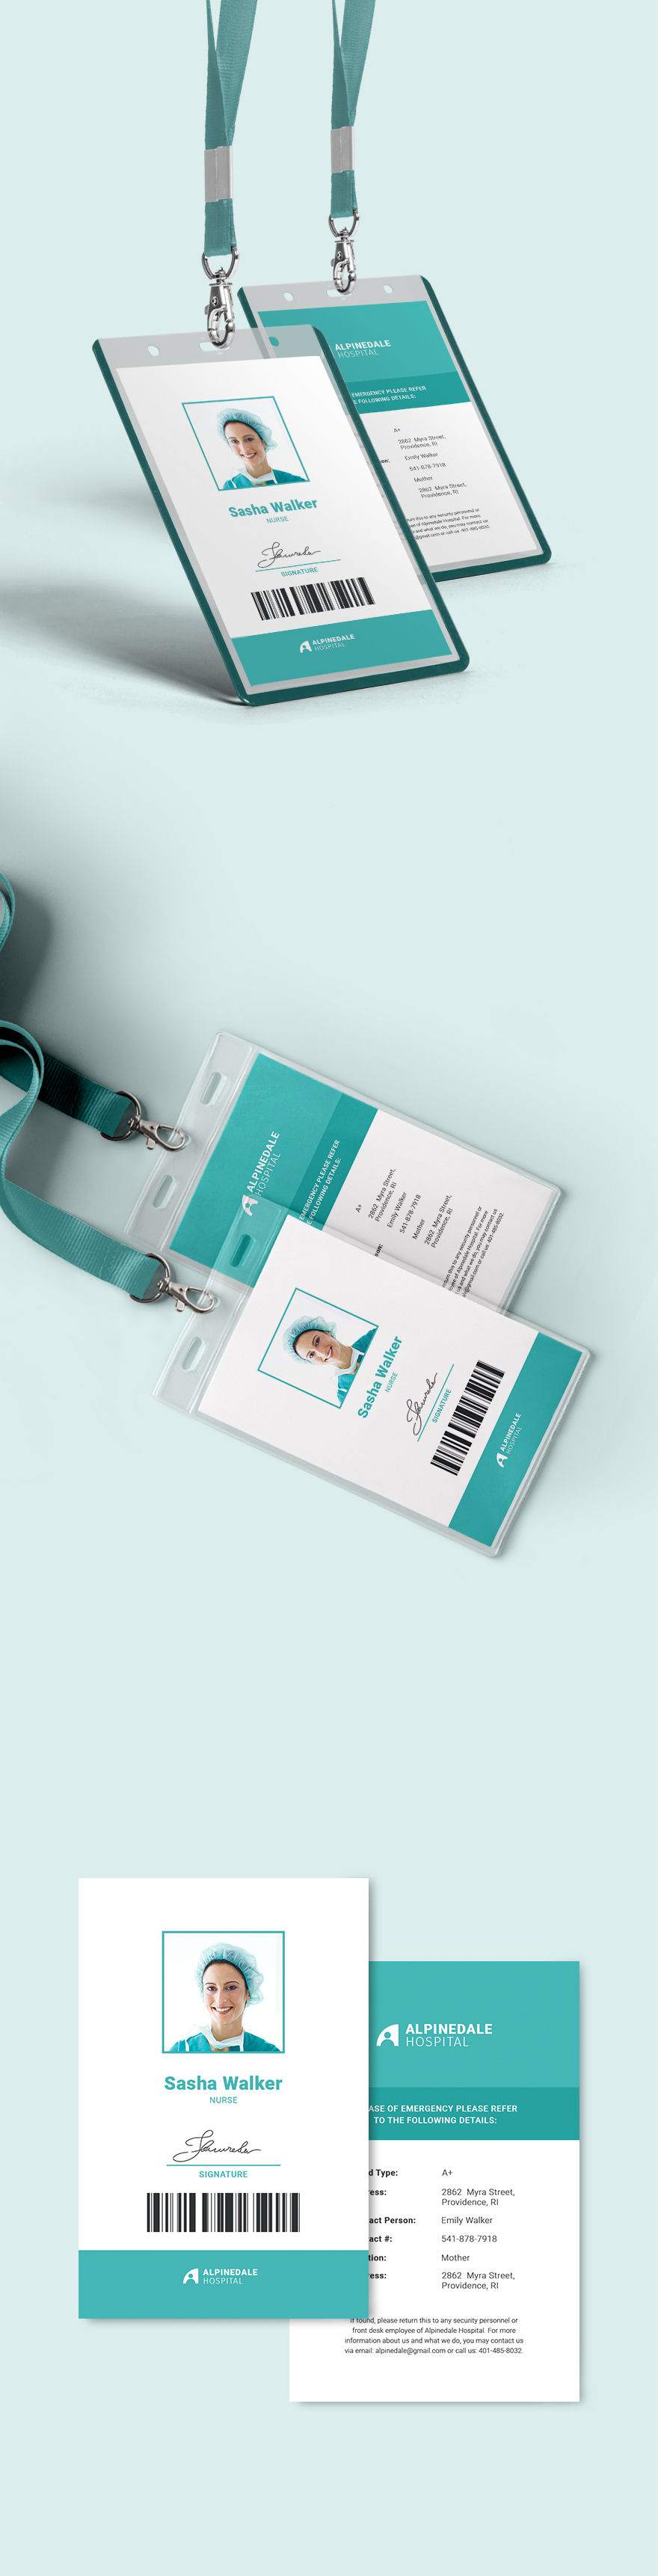 hospital id card template free download